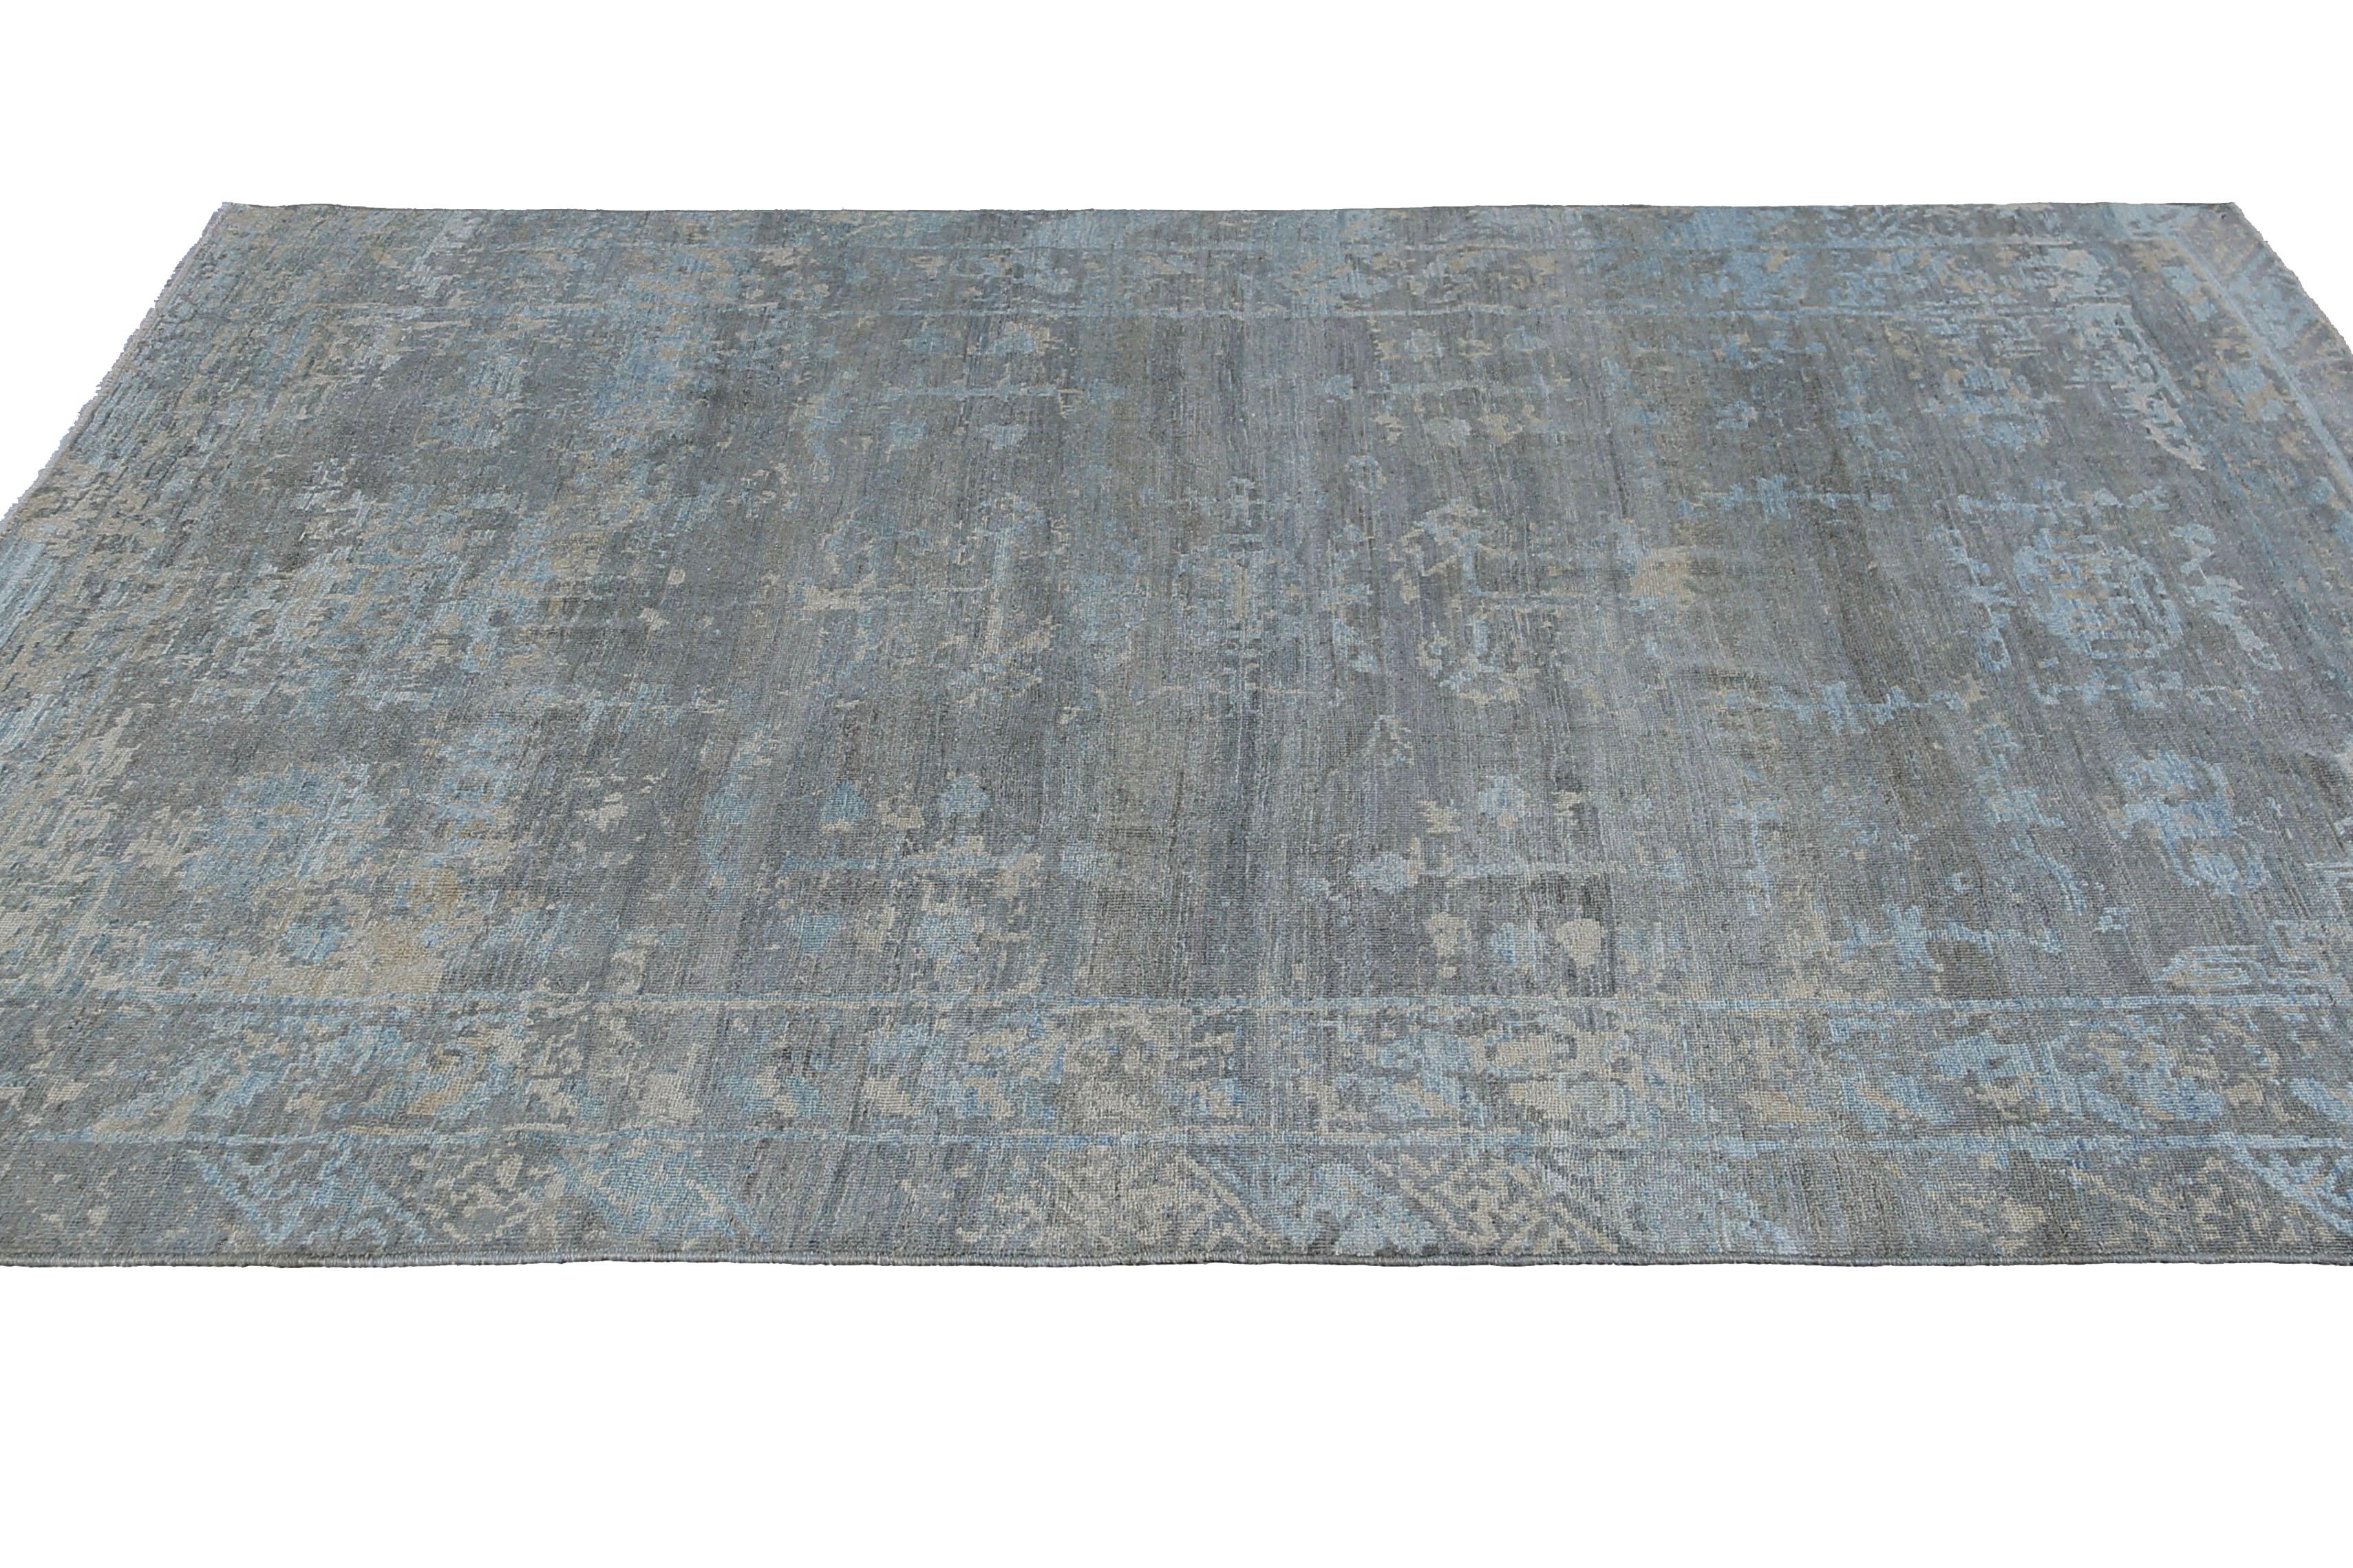 Our Turkish rug in the size of 9'2'' x 11'10'' is a stunning addition to any space, featuring deep blue colors that create a sense of calm and tranquility. Handcrafted using high-quality wool, this rug is both durable and soft to the touch. The